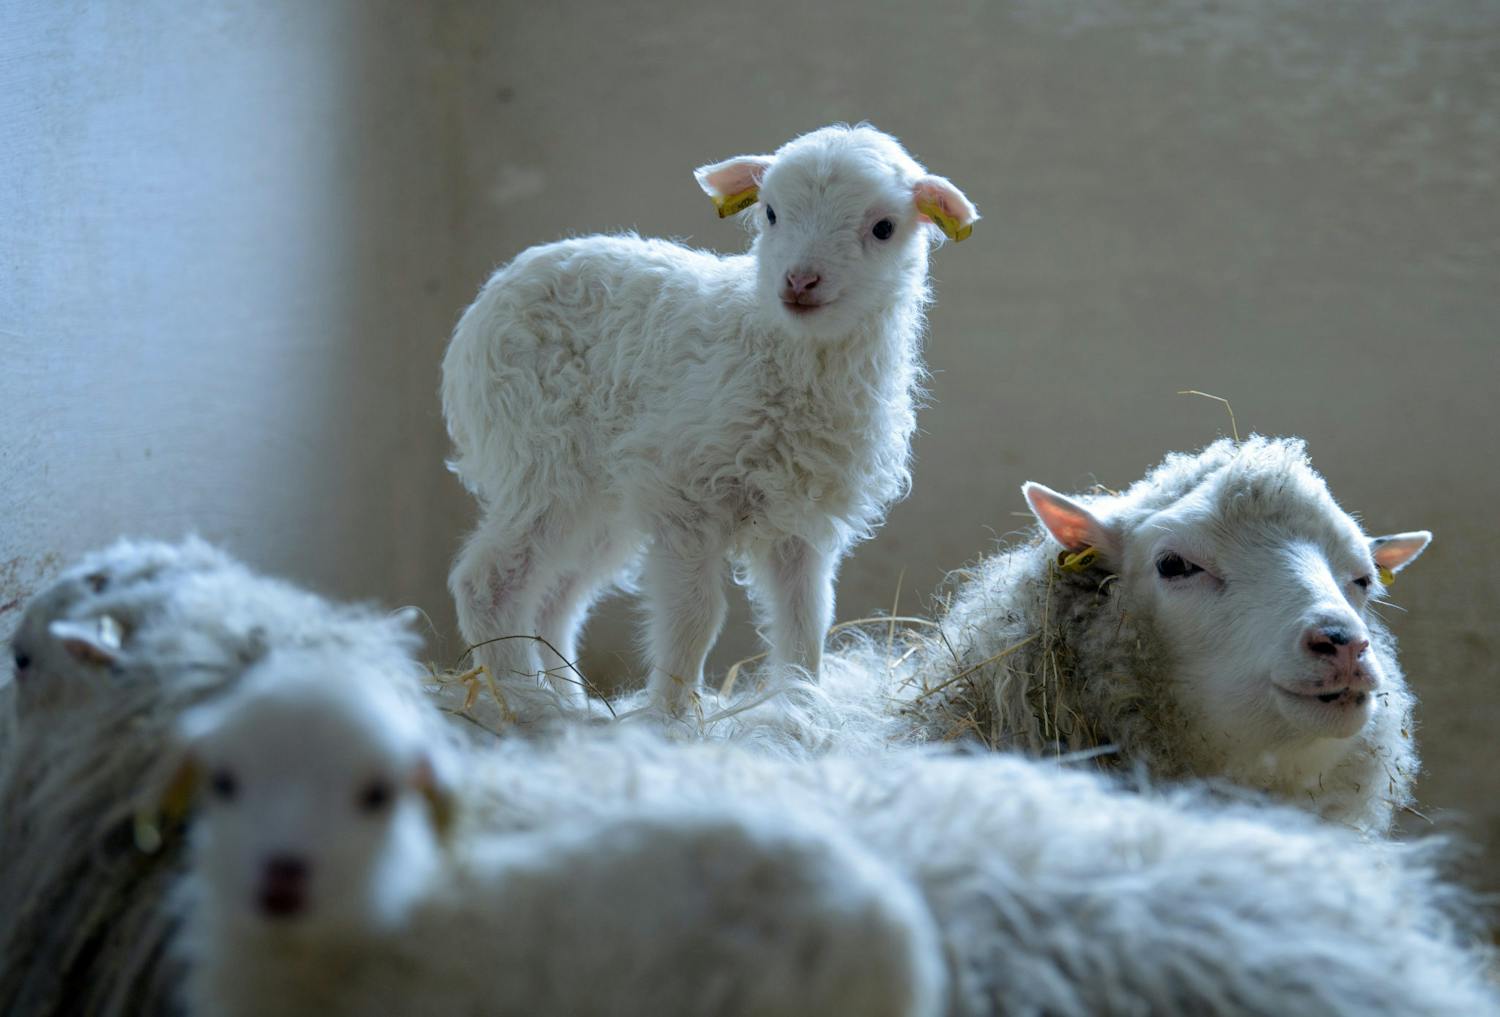 Farming: How's the lambing going?